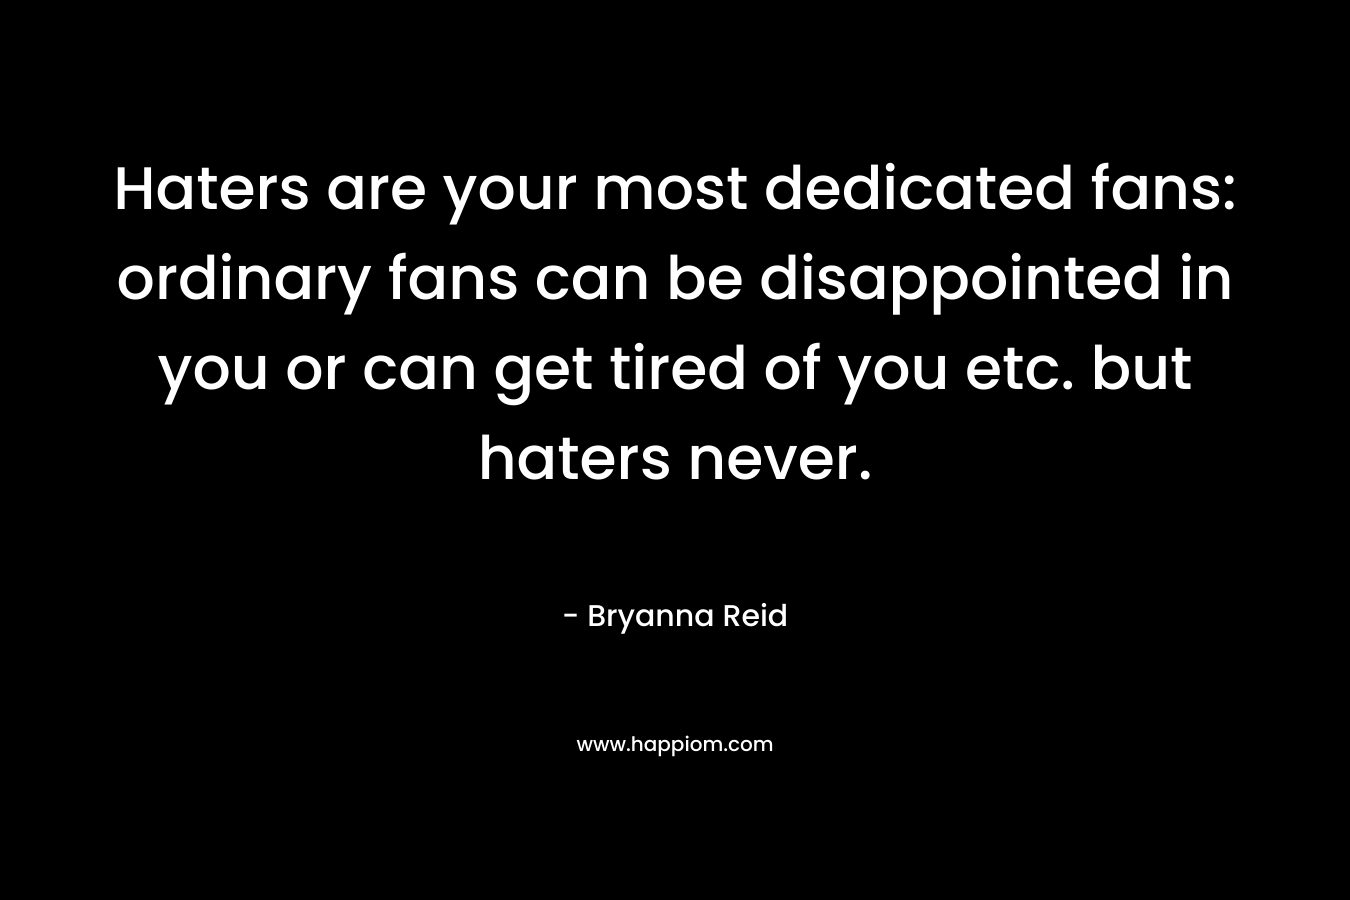 Haters are your most dedicated fans: ordinary fans can be disappointed in you or can get tired of you etc. but haters never. – Bryanna Reid